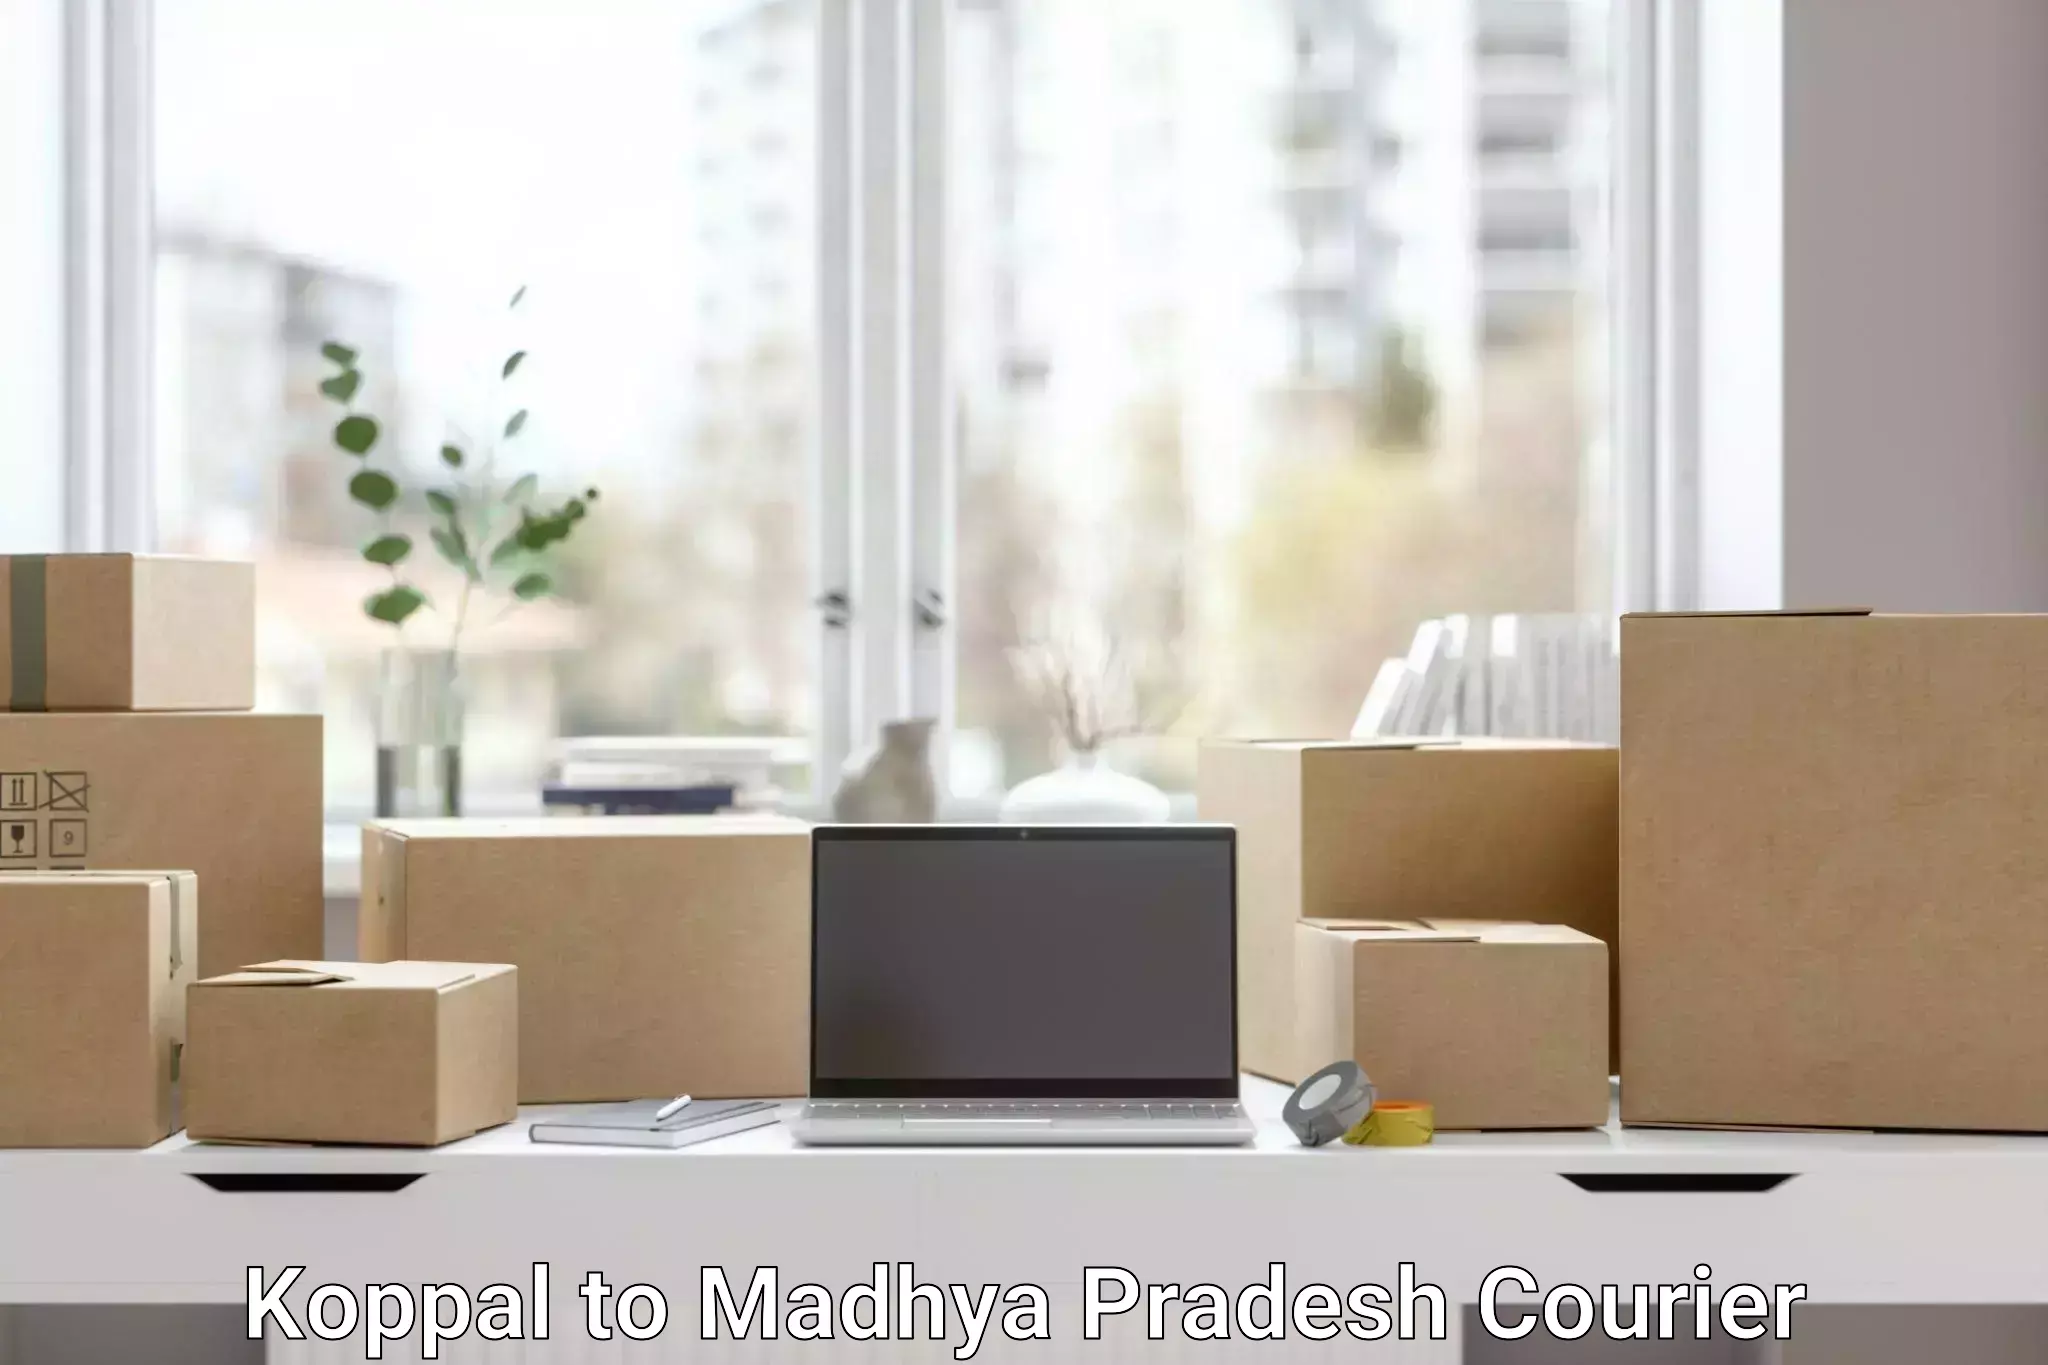 Customer-friendly courier services Koppal to Mandla